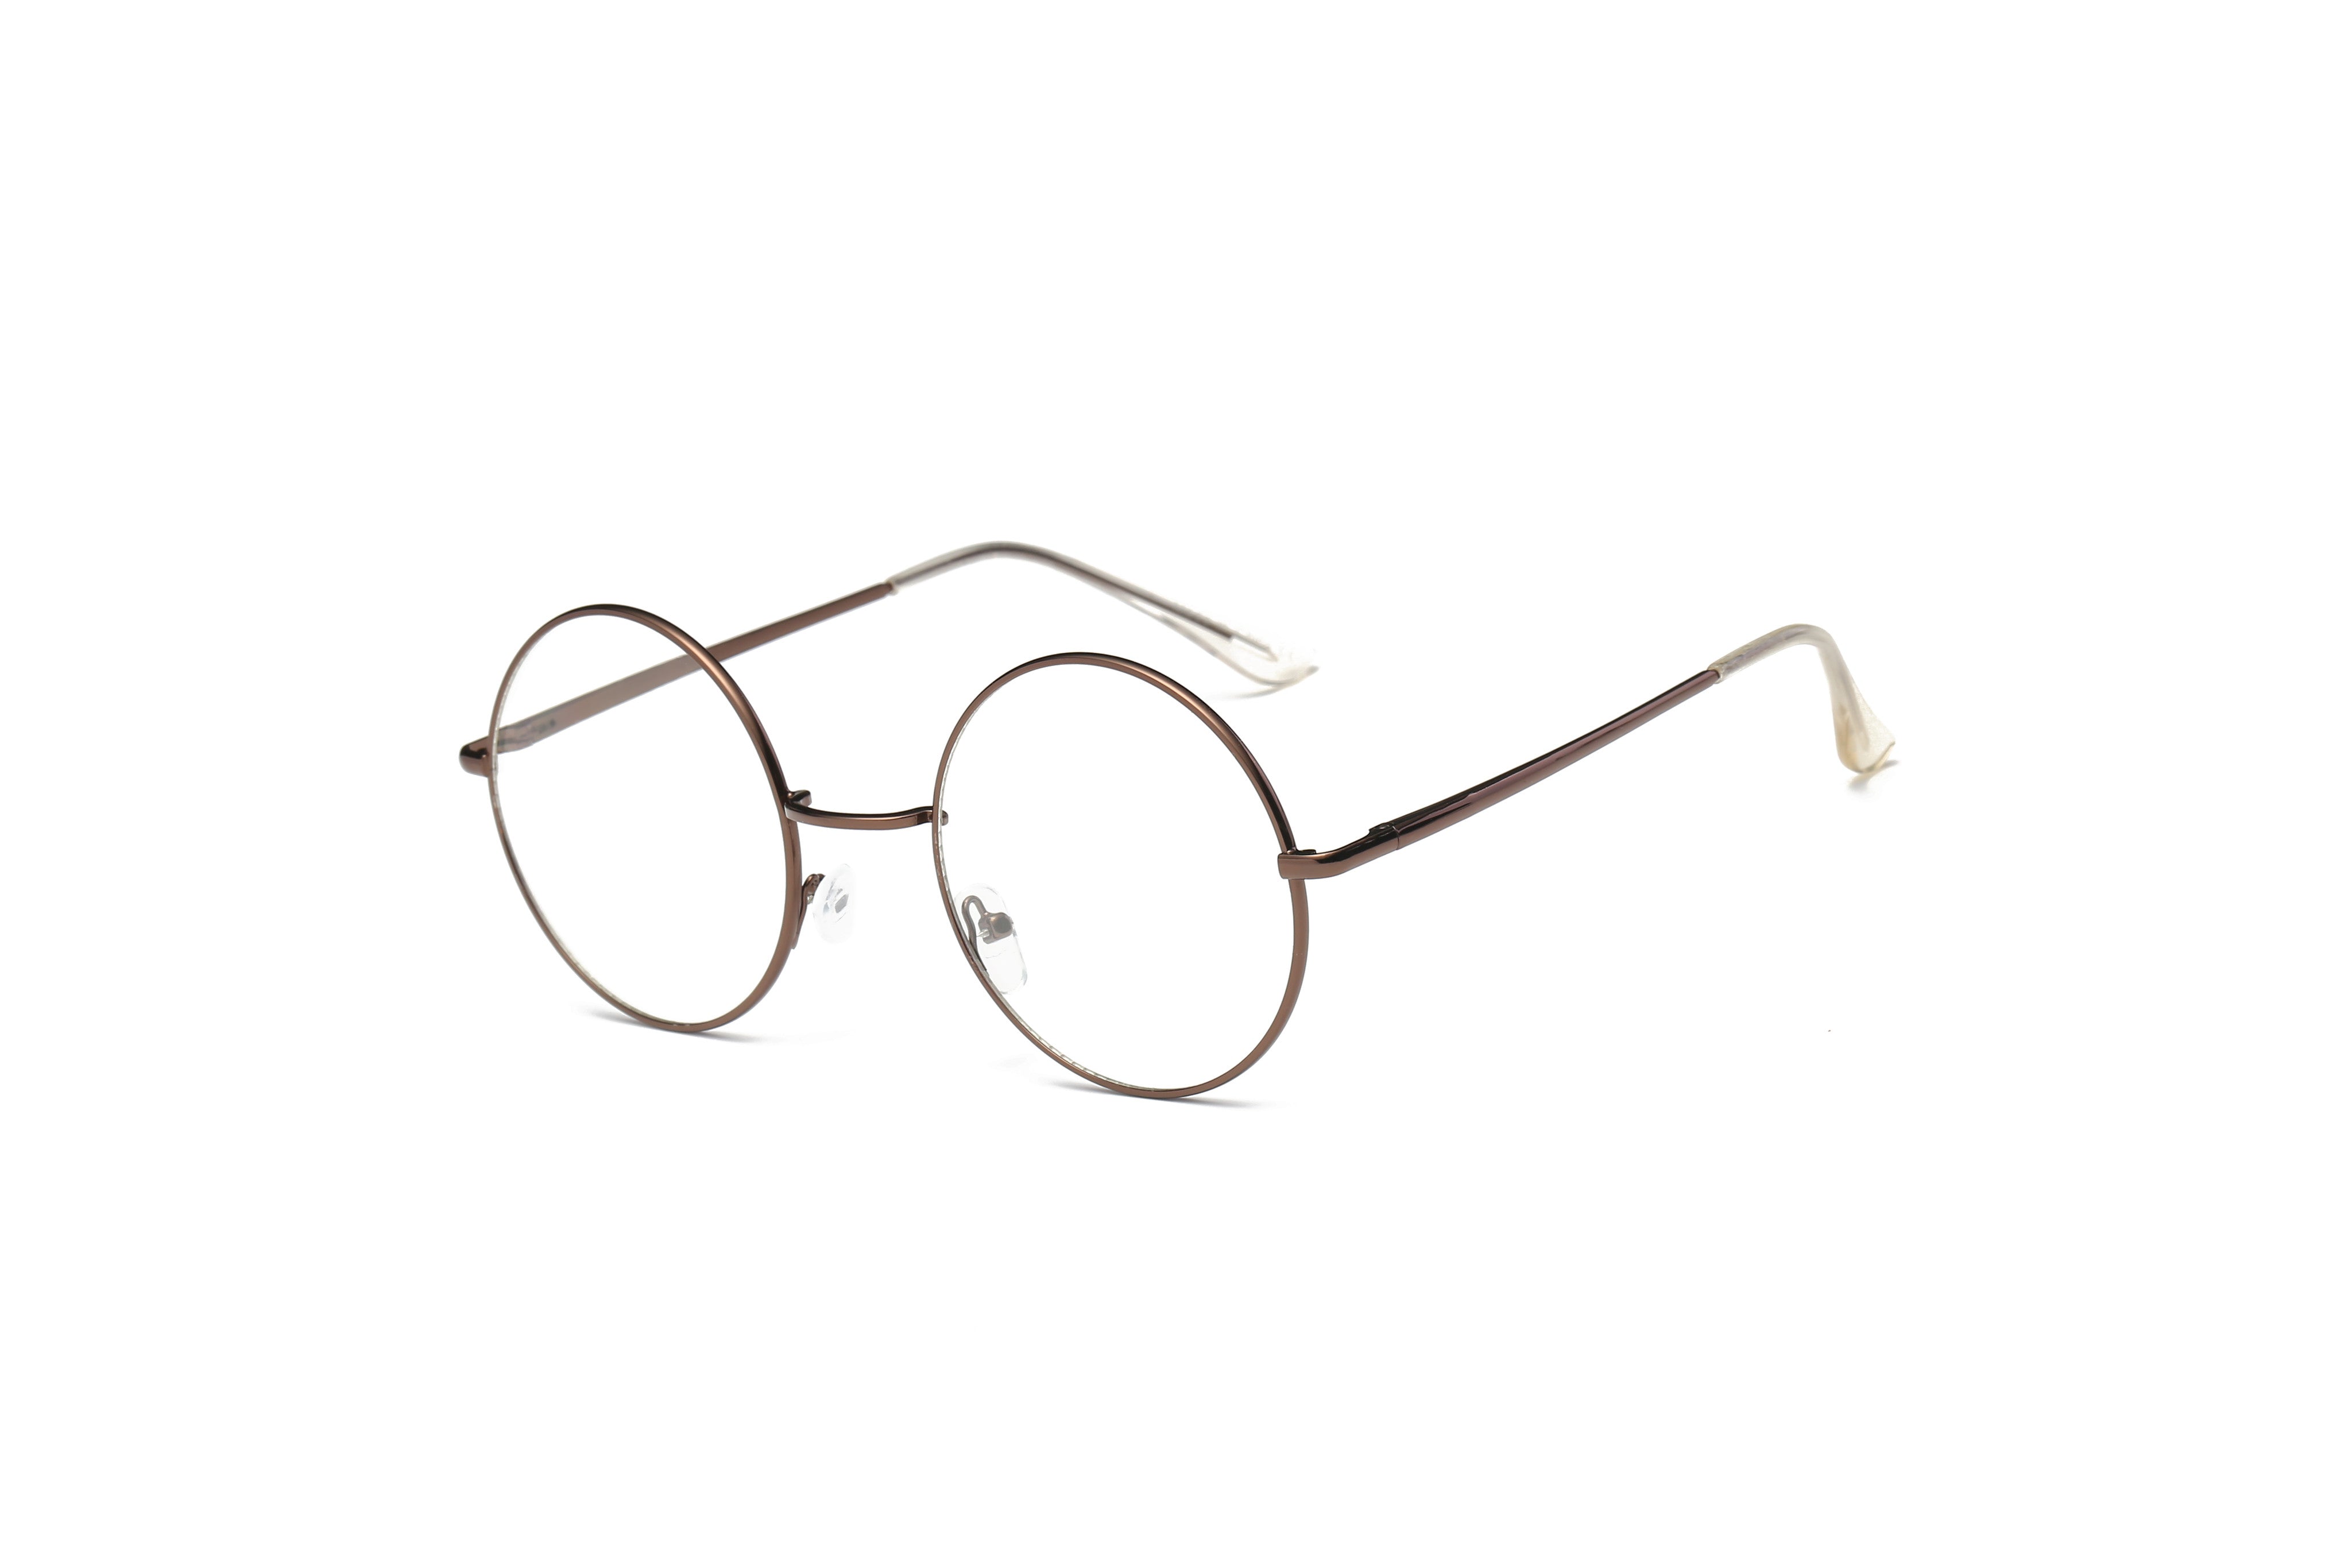 F1003 - Round Circle Clear Lens Fashion GLASSES Bronze